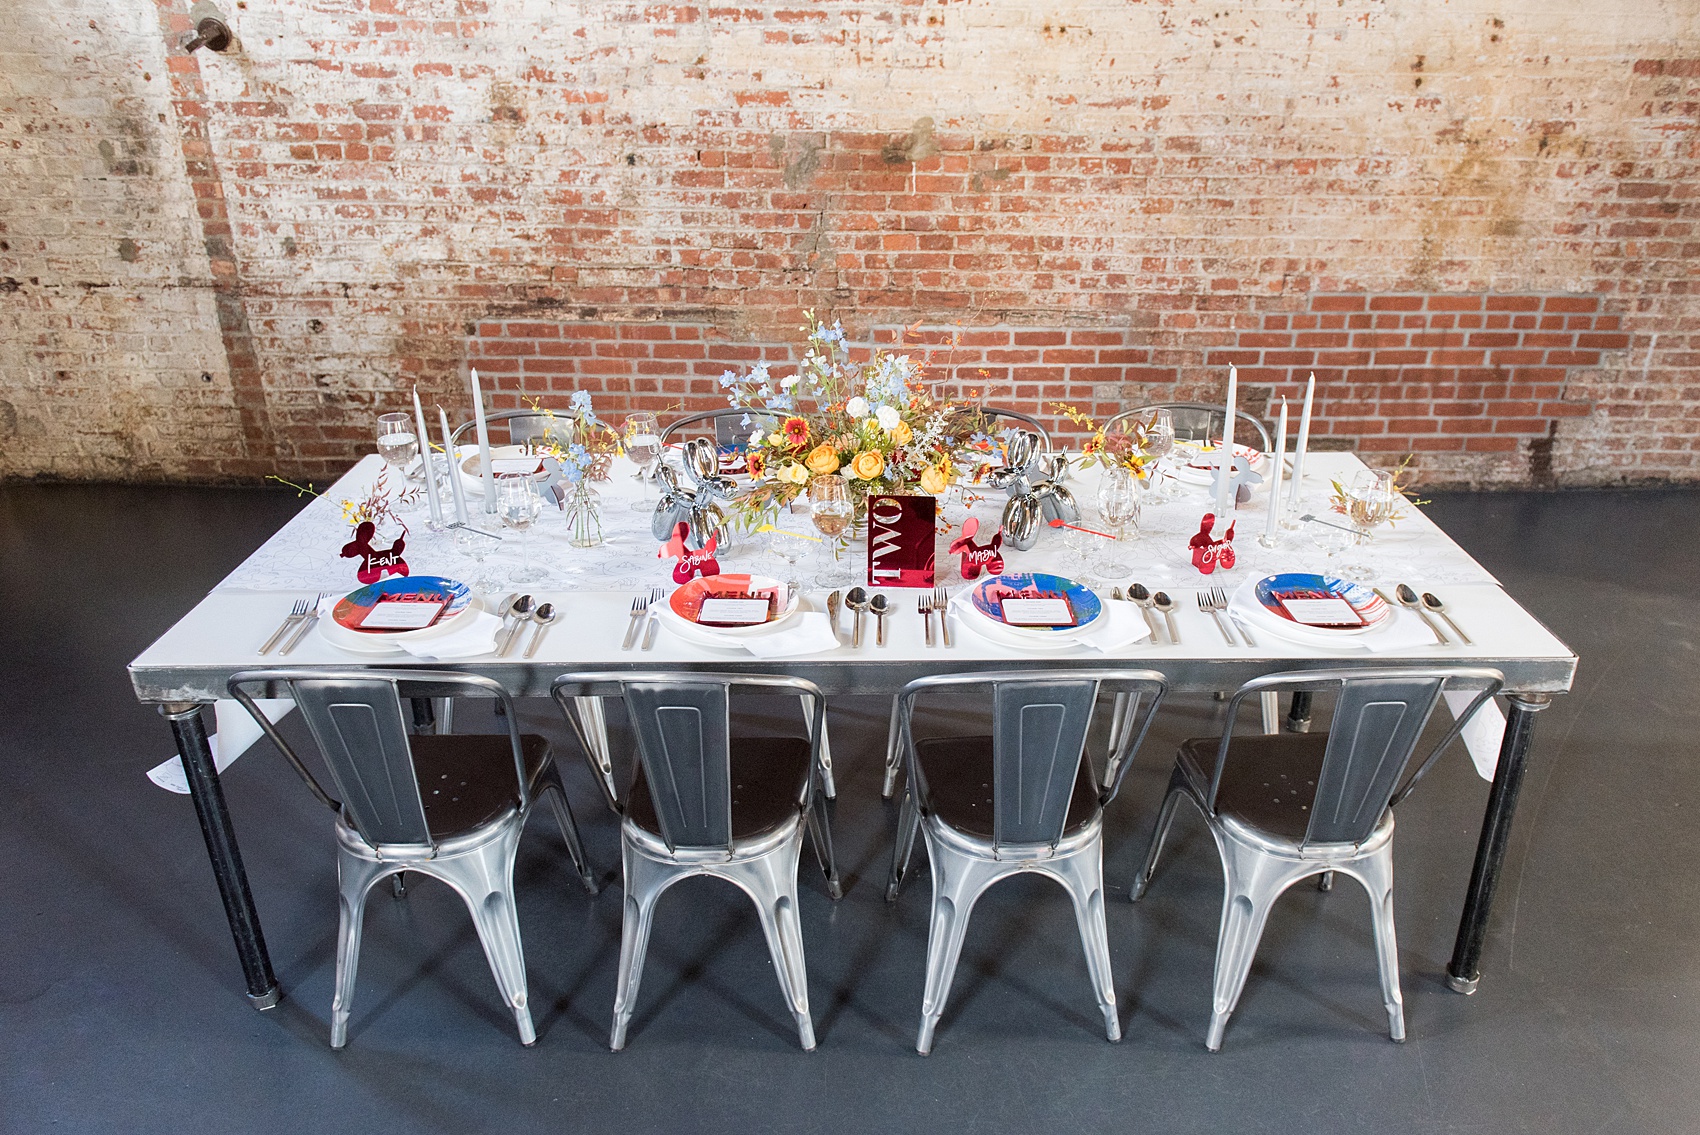 Mikkel Paige Photography photos of a wedding at the Green Building in Brooklyn, New York. This same sex, gay marriage styled shoot was created by Color Pop Events. The urban dinner table was styled by Taylor and Hov, inspired by Jeff Koons and neo pop art. Flower centerpieces are by Abby Tabak Studio.